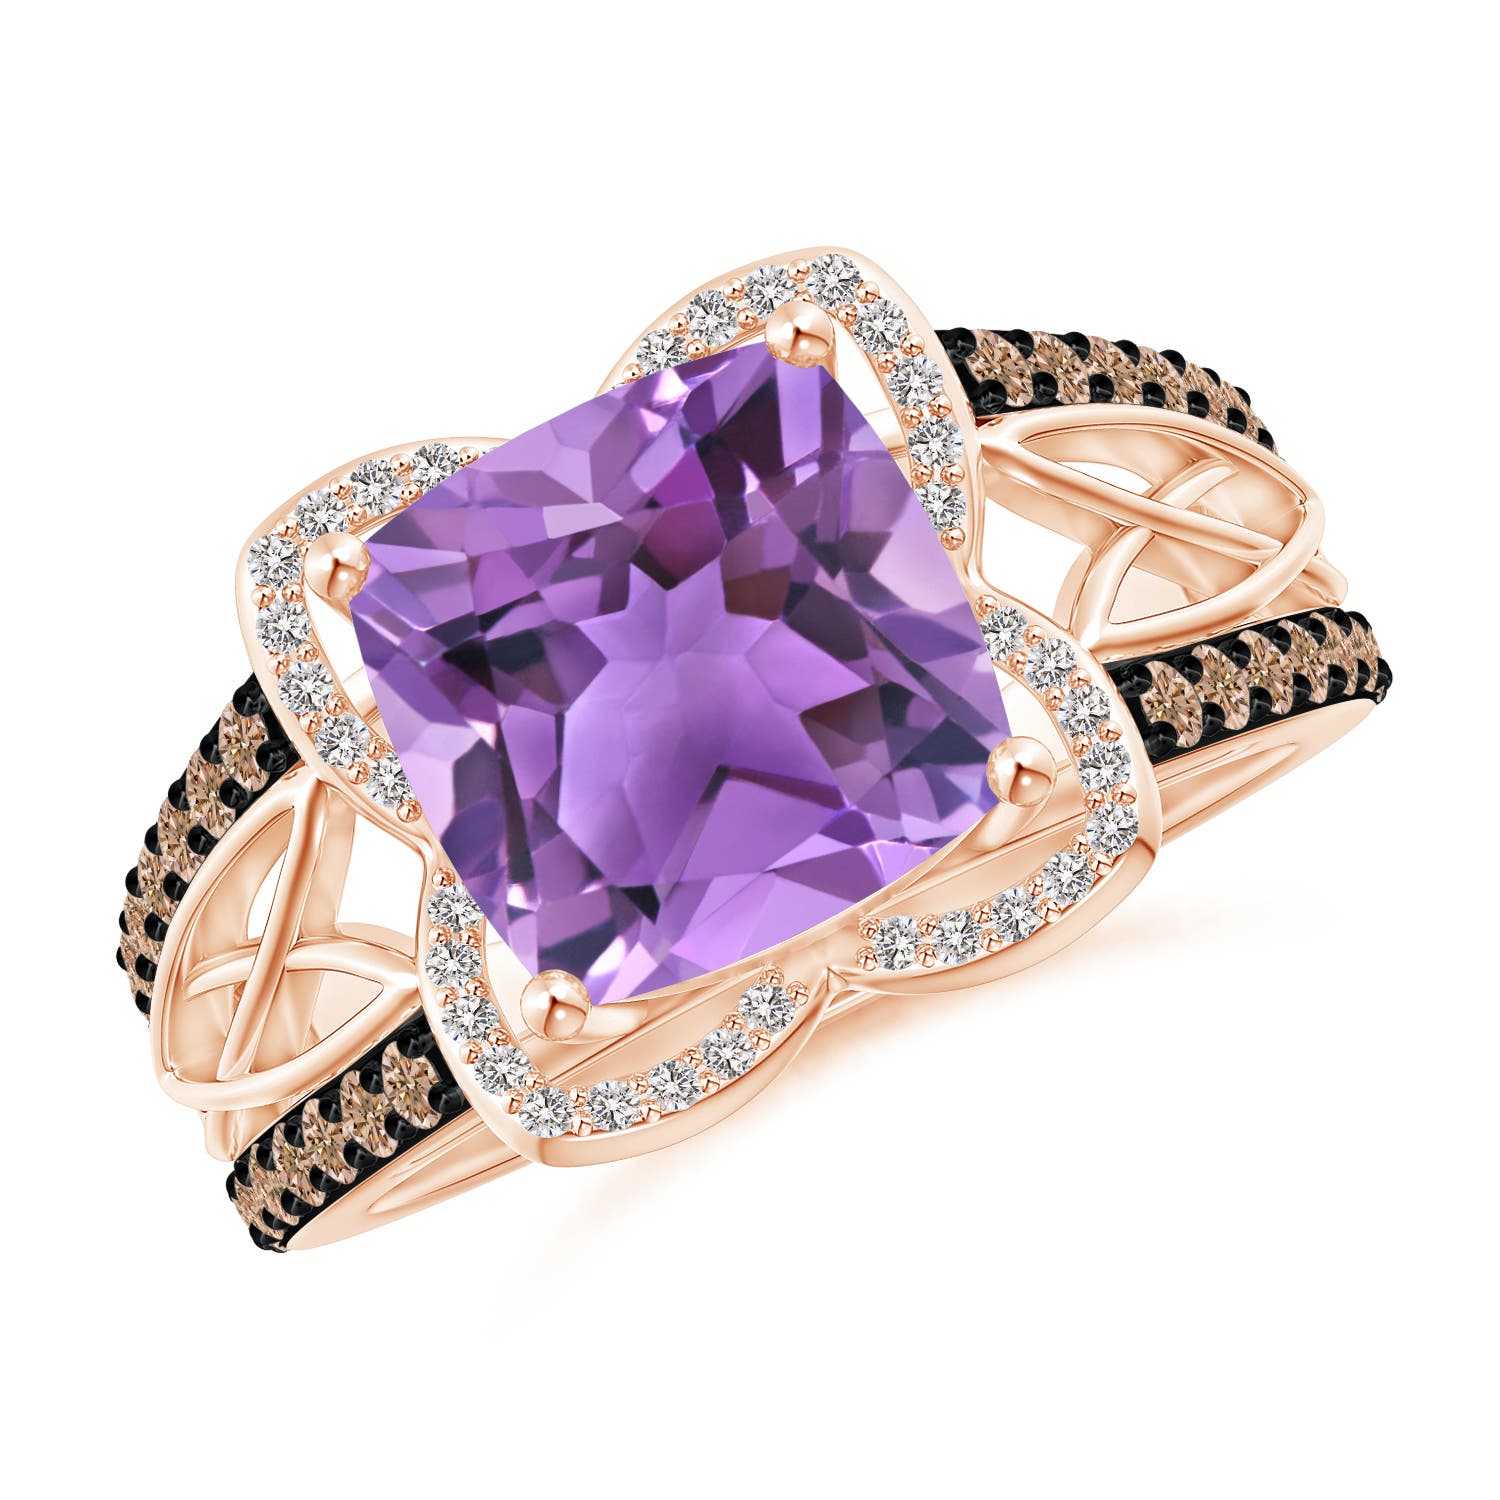 AA - Amethyst / 3.61 CT / 14 KT Rose Gold